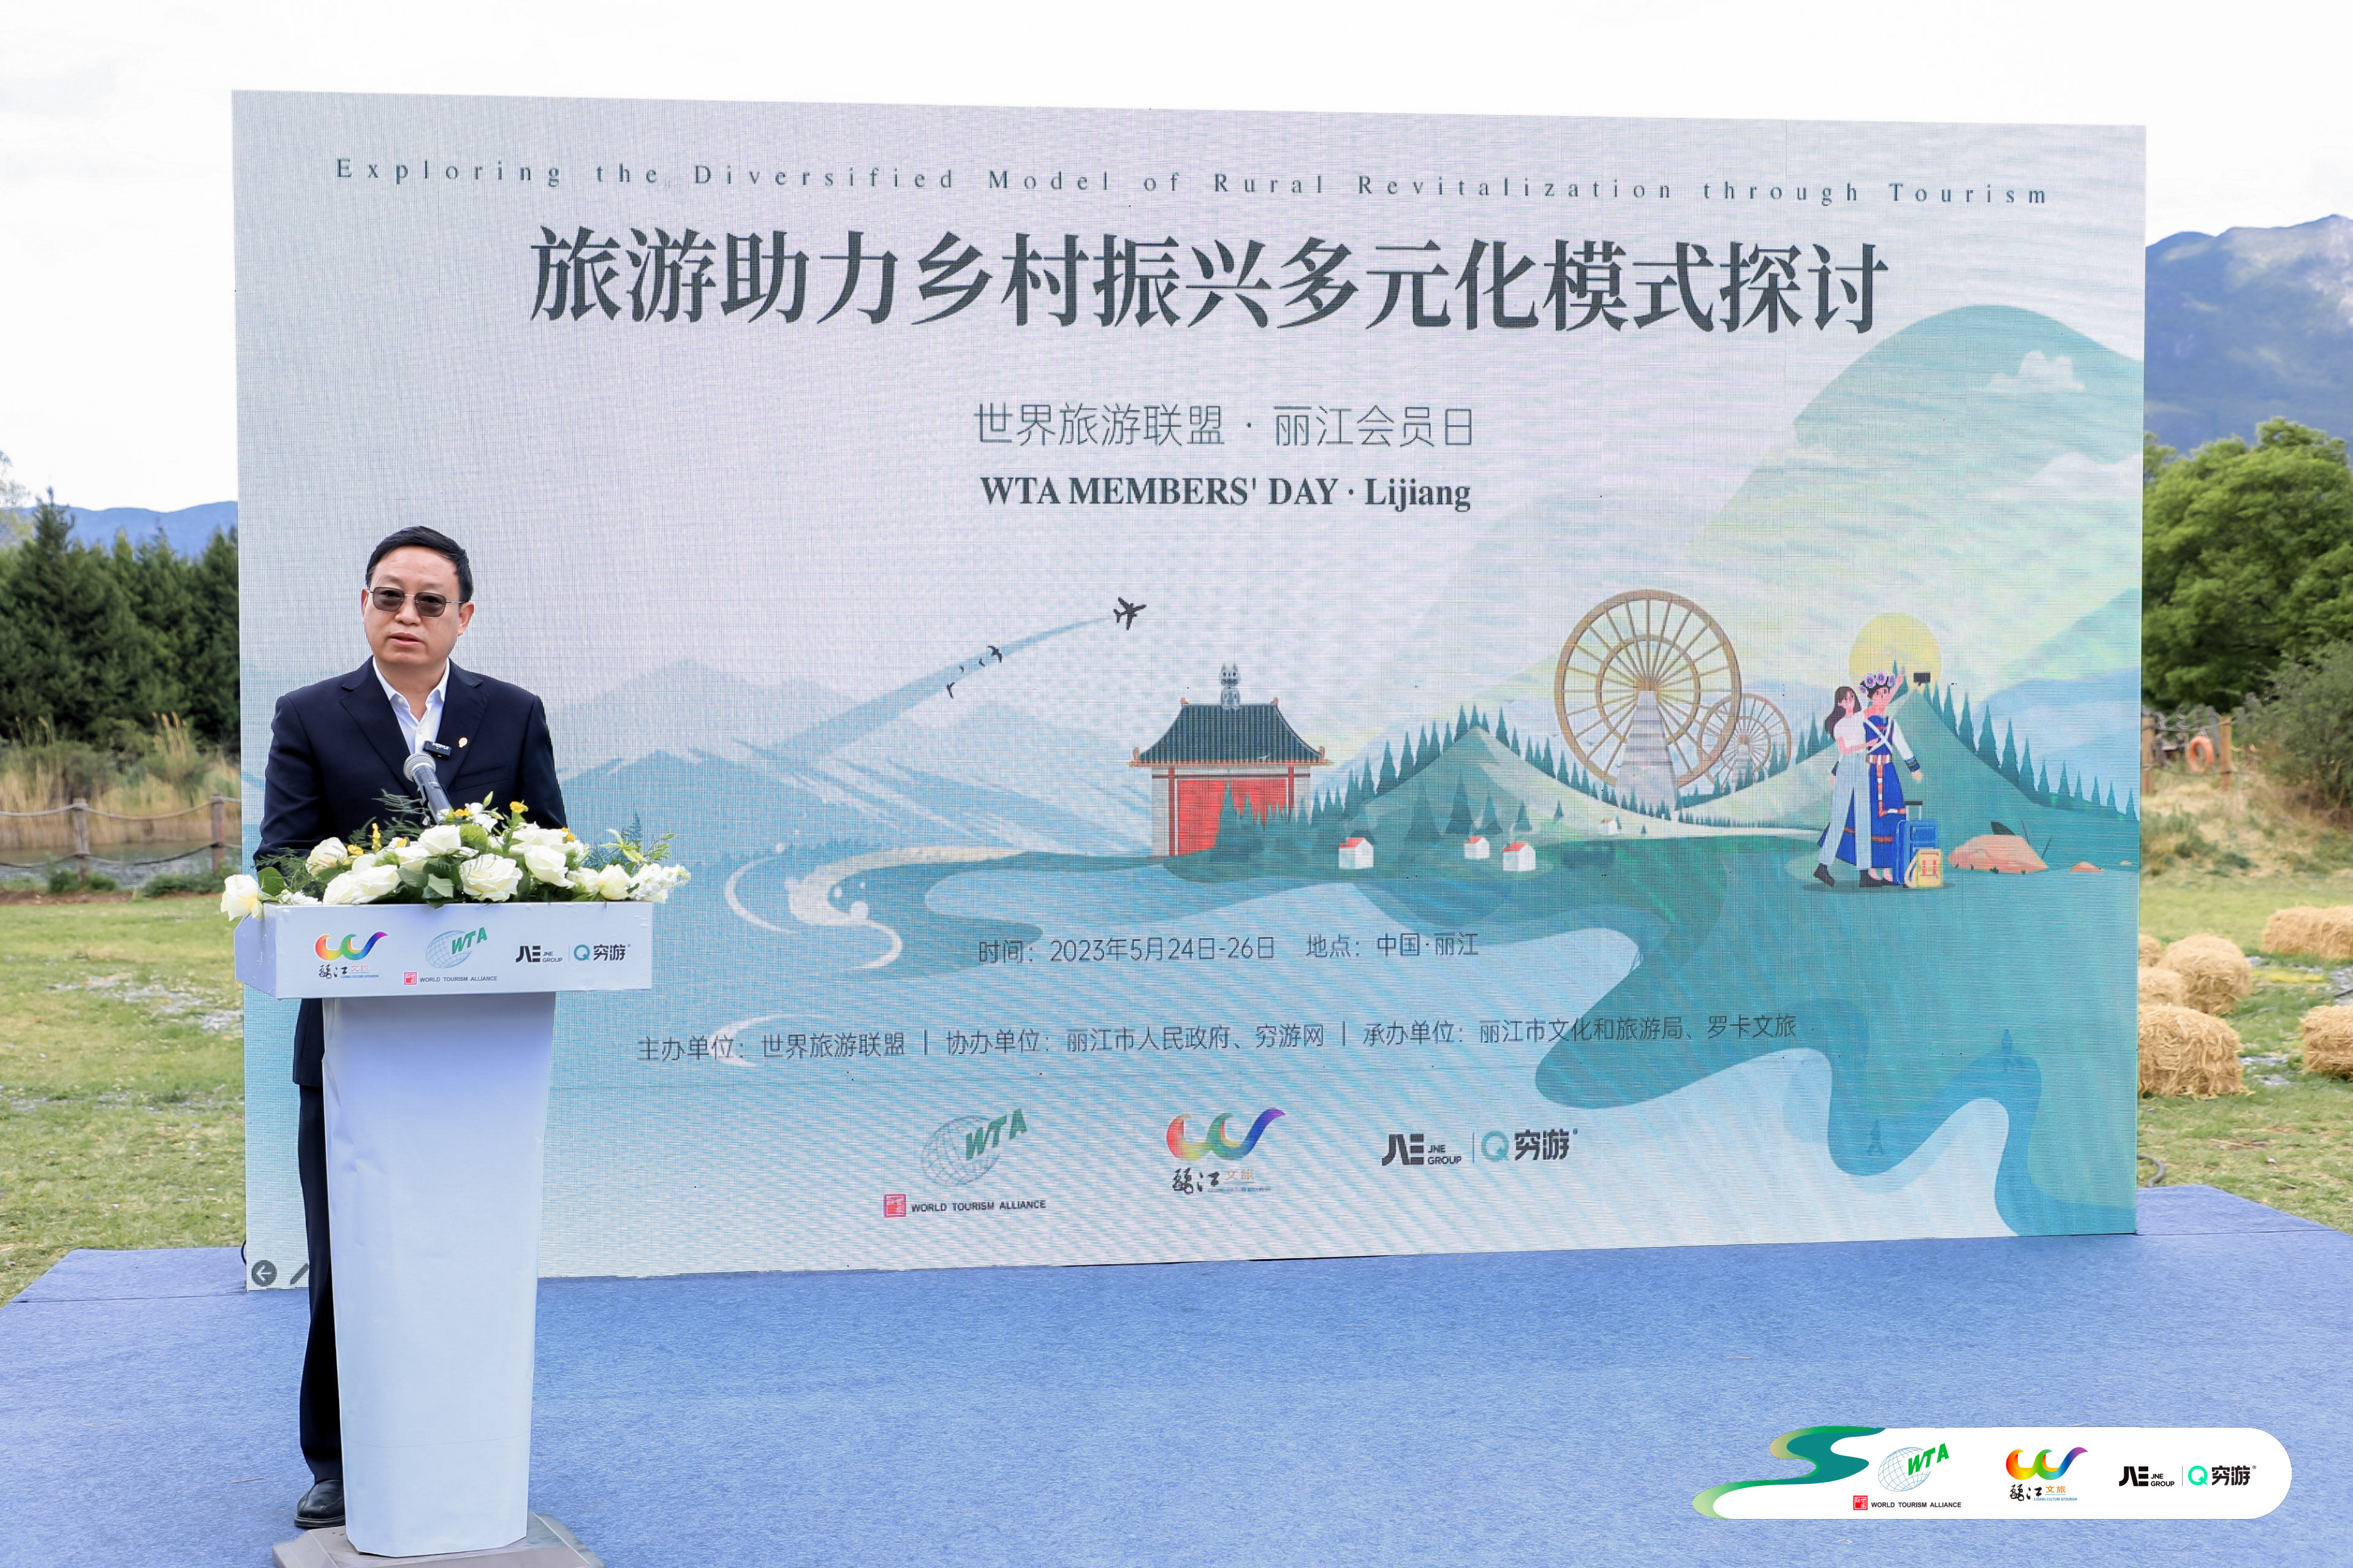 Rao Xiangbi, Party Group Member and Deputy Director of the Yunnan Provincial Department of Culture and Tourism